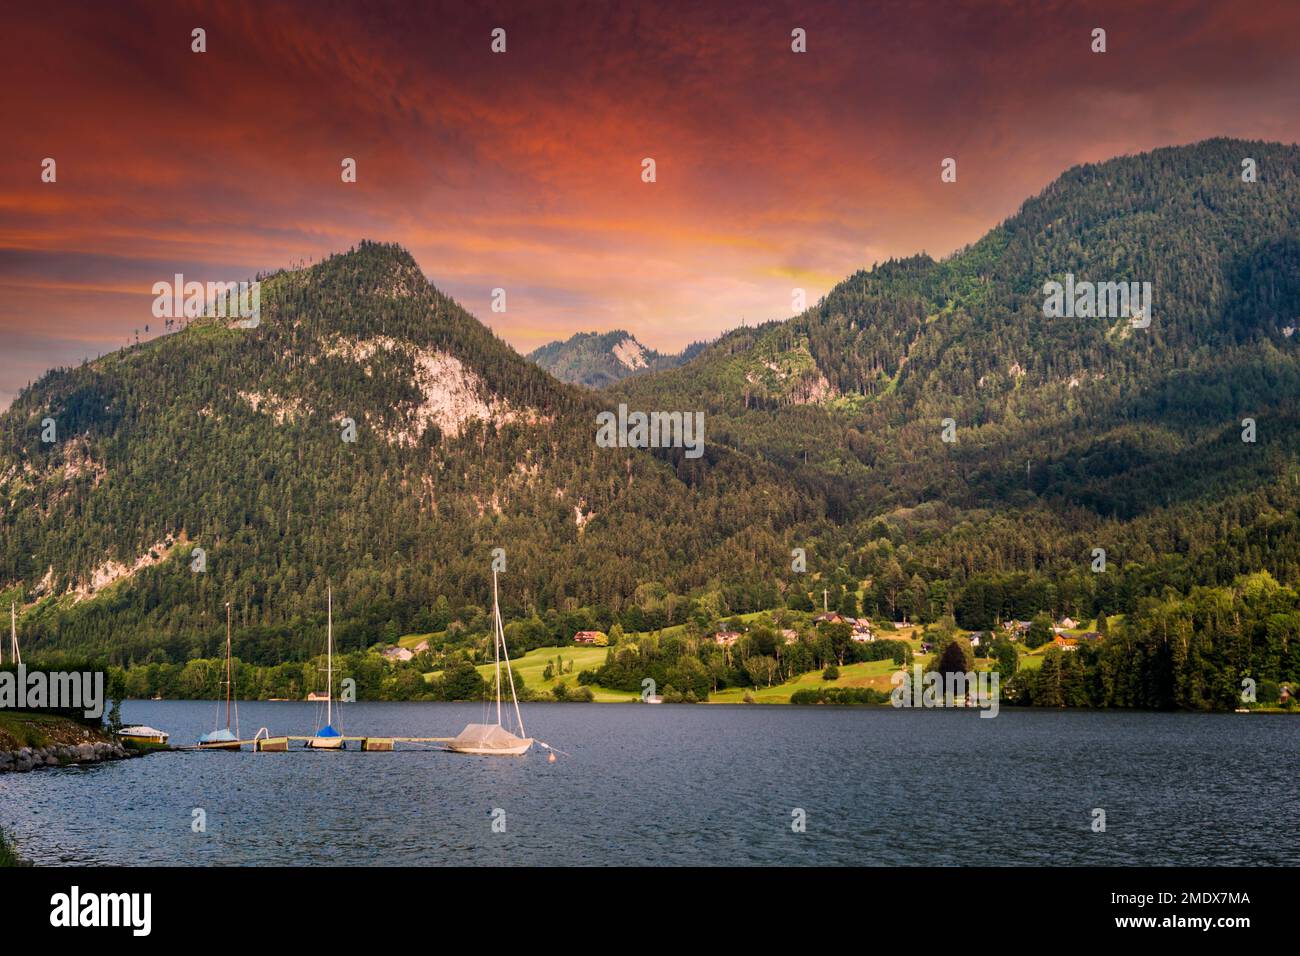 A sunset by lake in Austria. The lake is surrounded by high Alps. Stock Photo